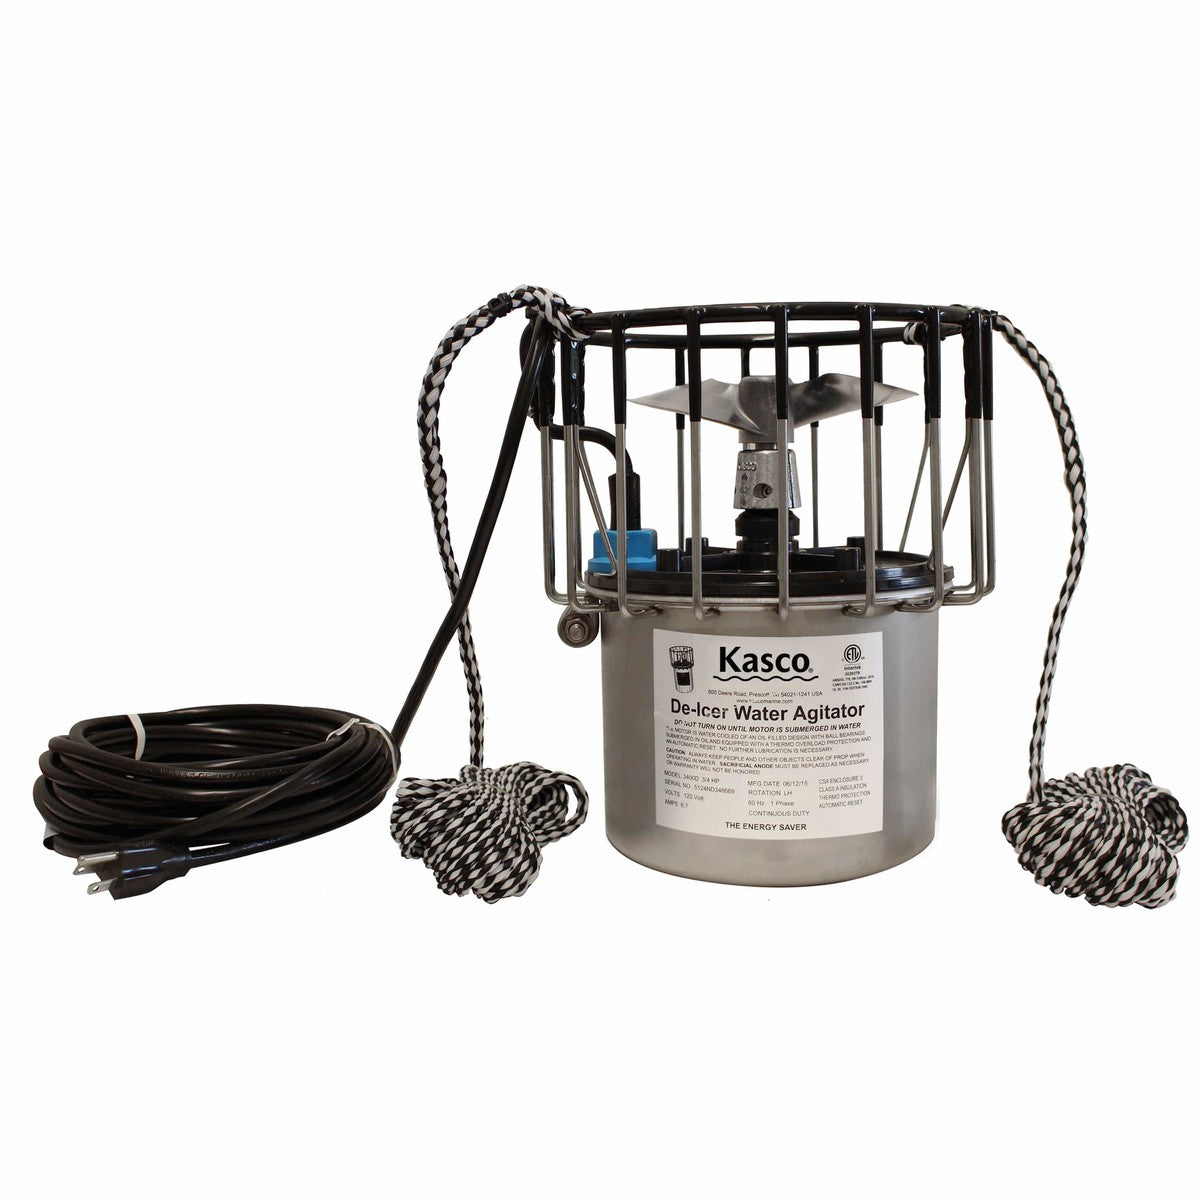 Kasco Marine Not Qualified for Free Shipping Kasco Marine De-Icer 1/2hp 120v 50' Cord #2400D050